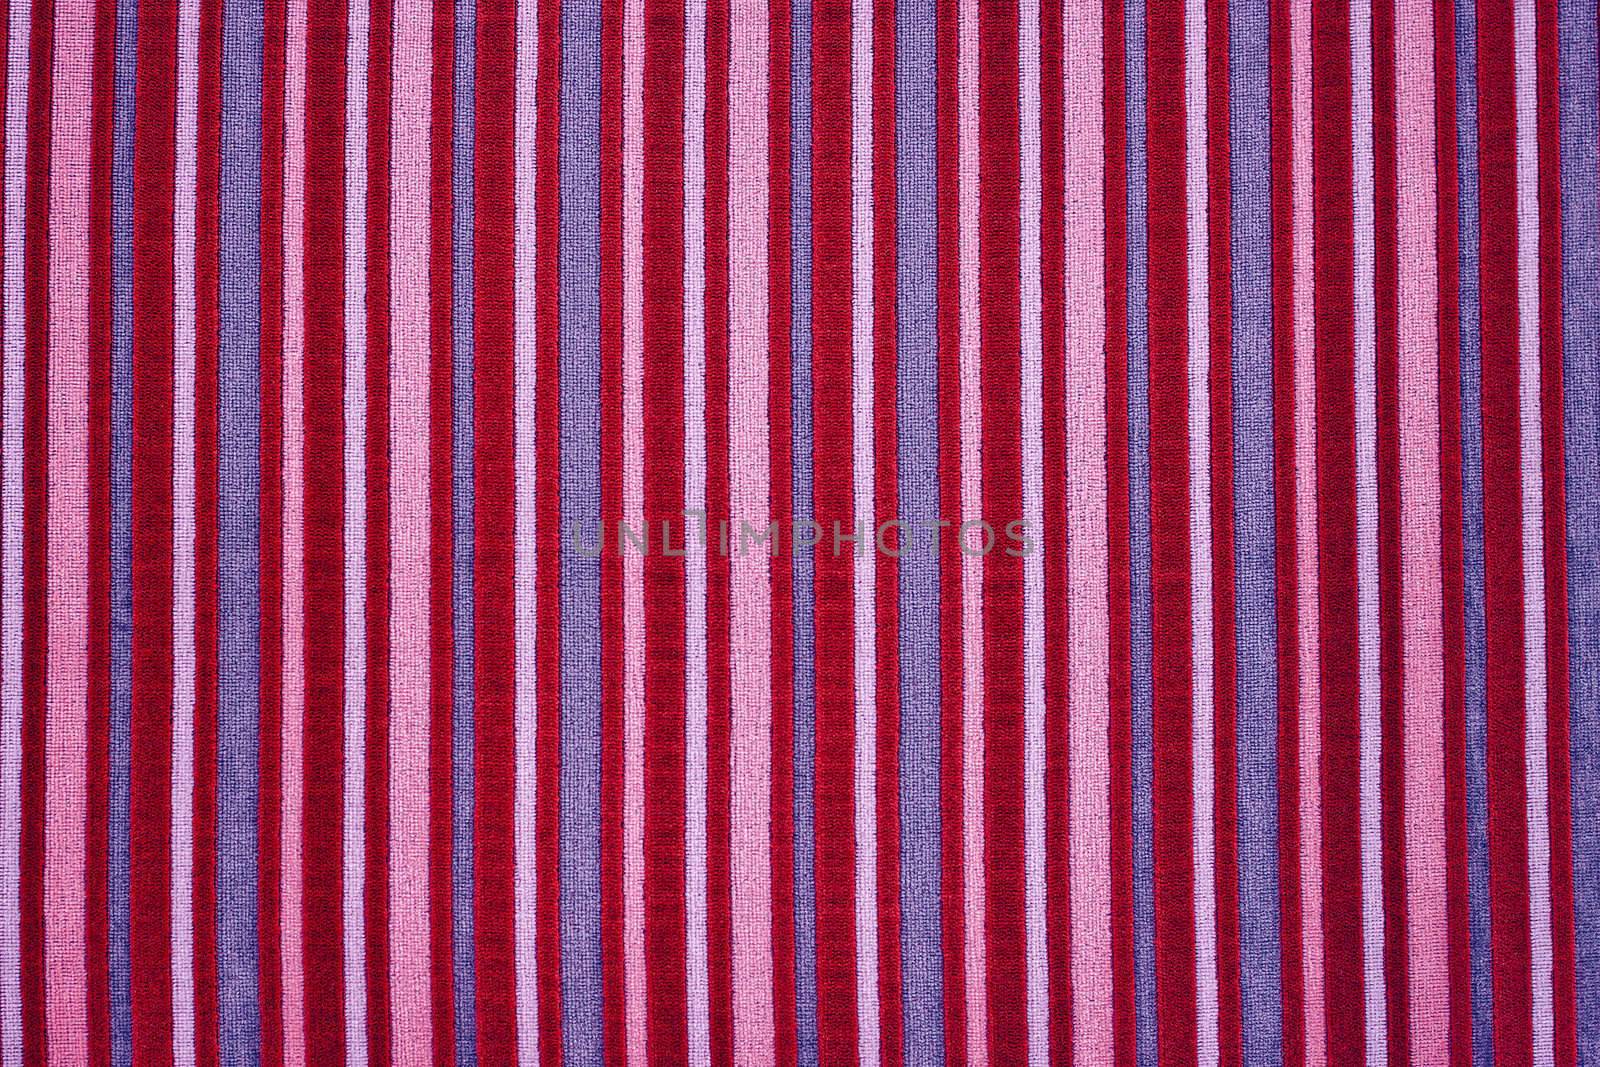 A funky red striped background or texture